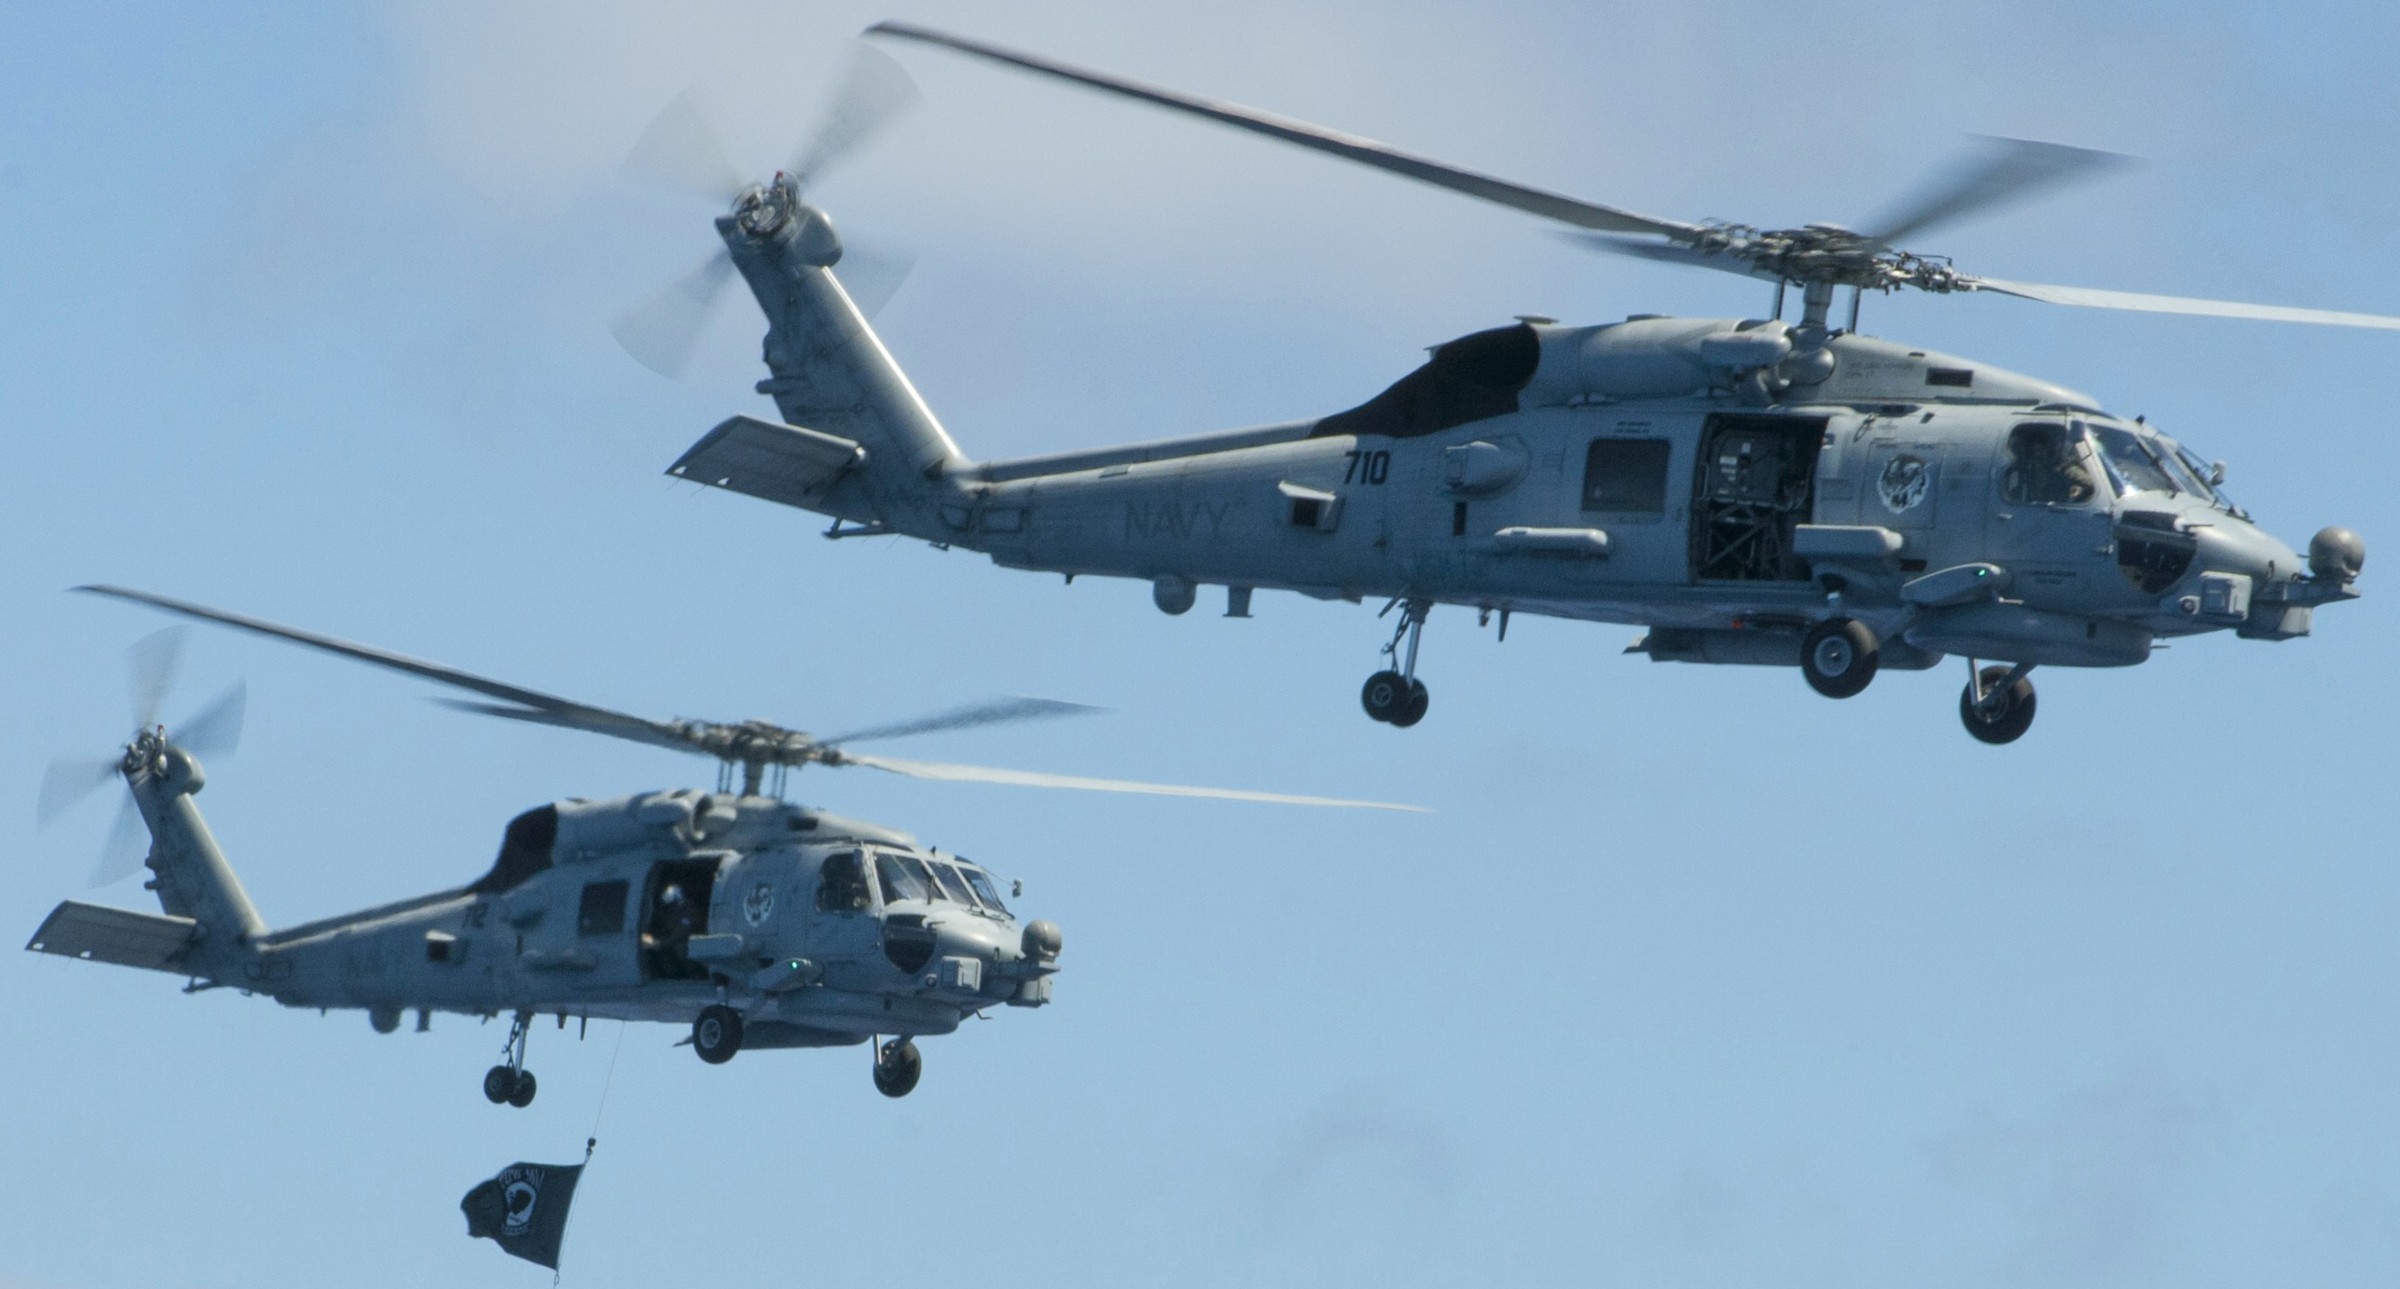 hsm-73 battlecats helicopter maritime strike squadron us navy mh-60r seahawk 2015 49